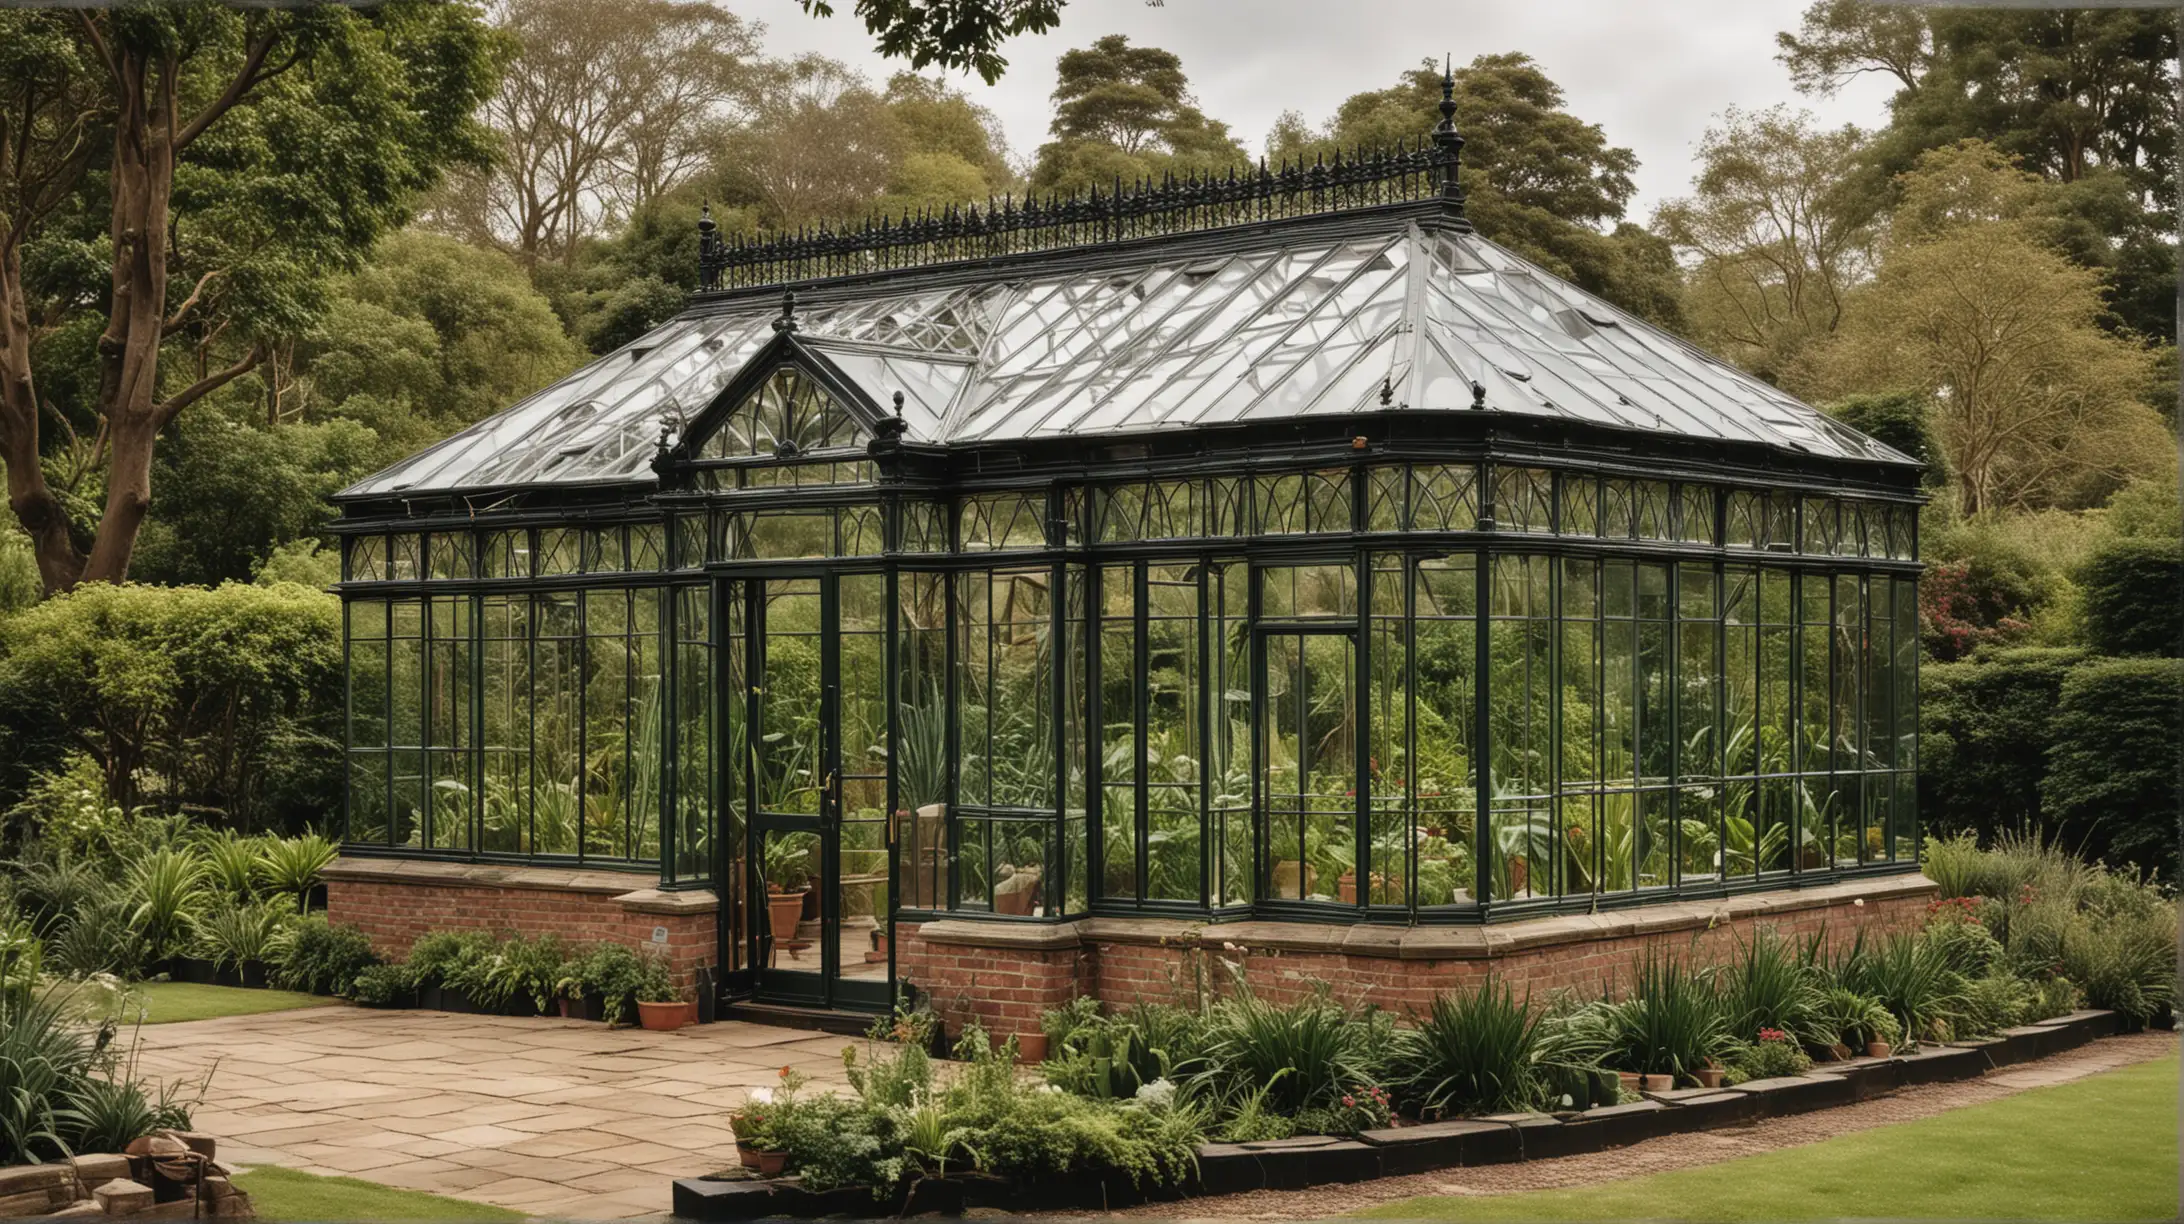 Victorian Glasshouse with Lush Greenery and Ornate Ironwork